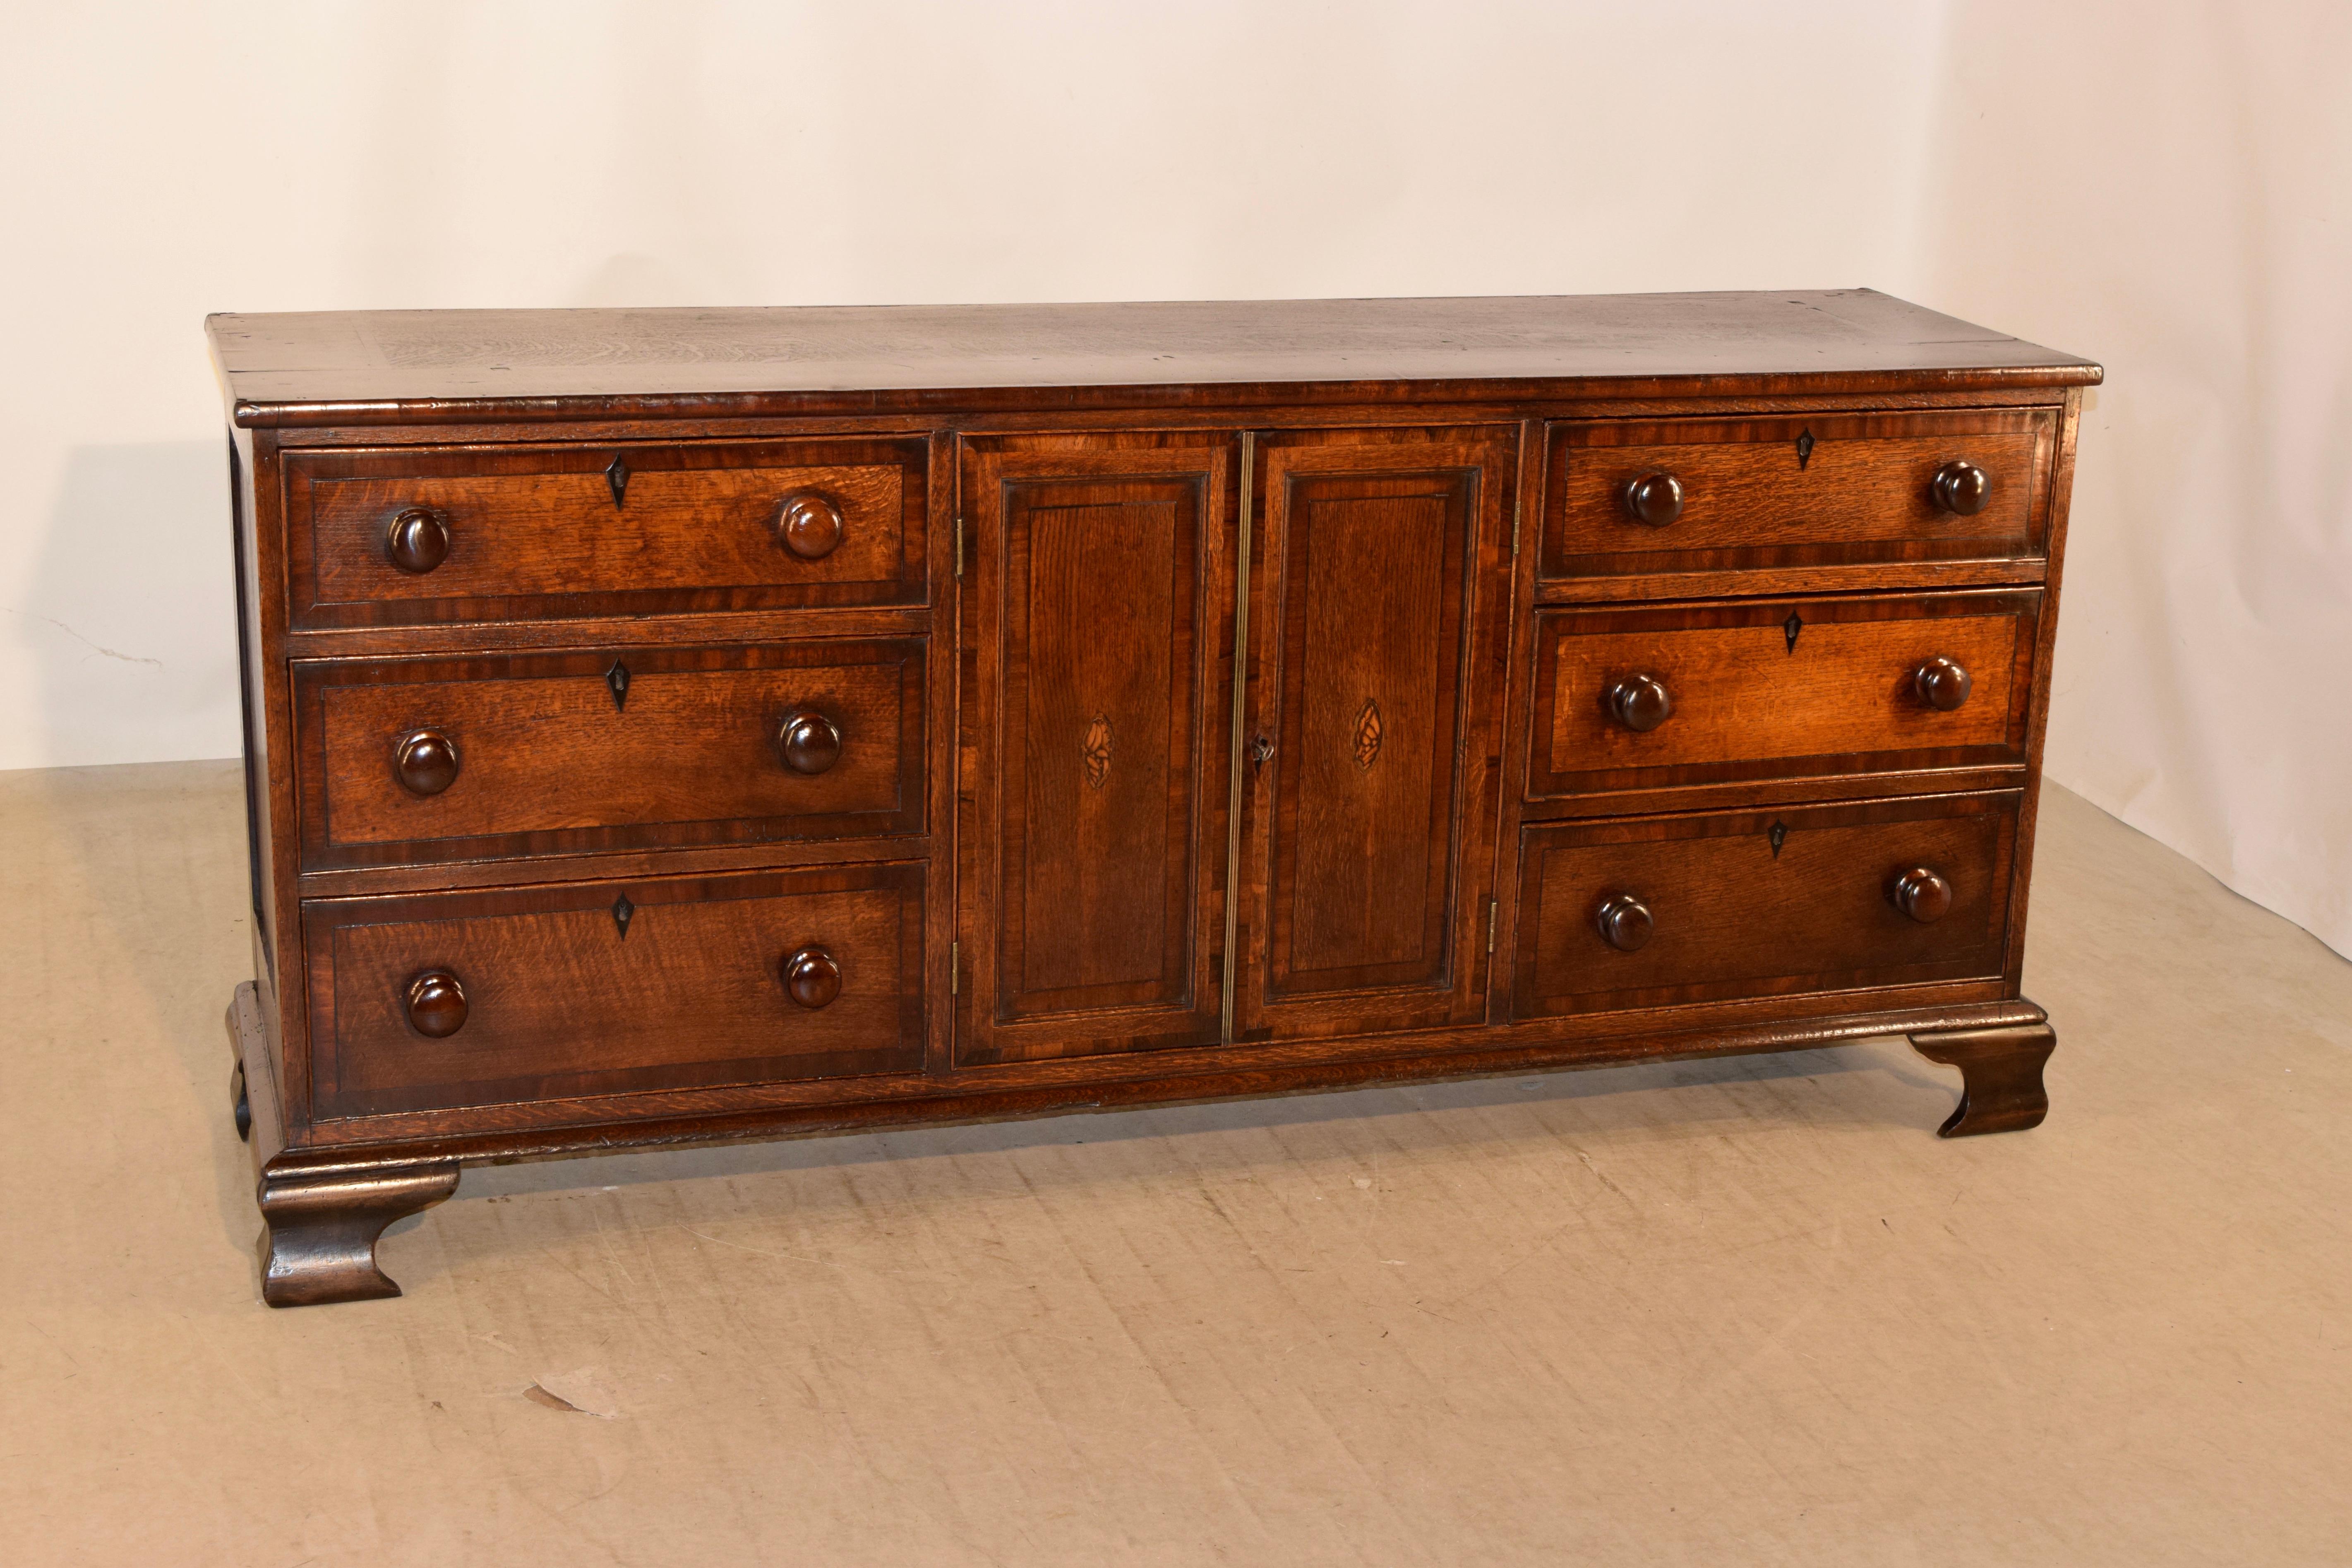 Early 19th century English oak dresser base with wide mahogany band around the top following down to paneled sides and a pair of central paneled doors with shell inlay, which open to reveal shelving. The doors are flanked on either side by three